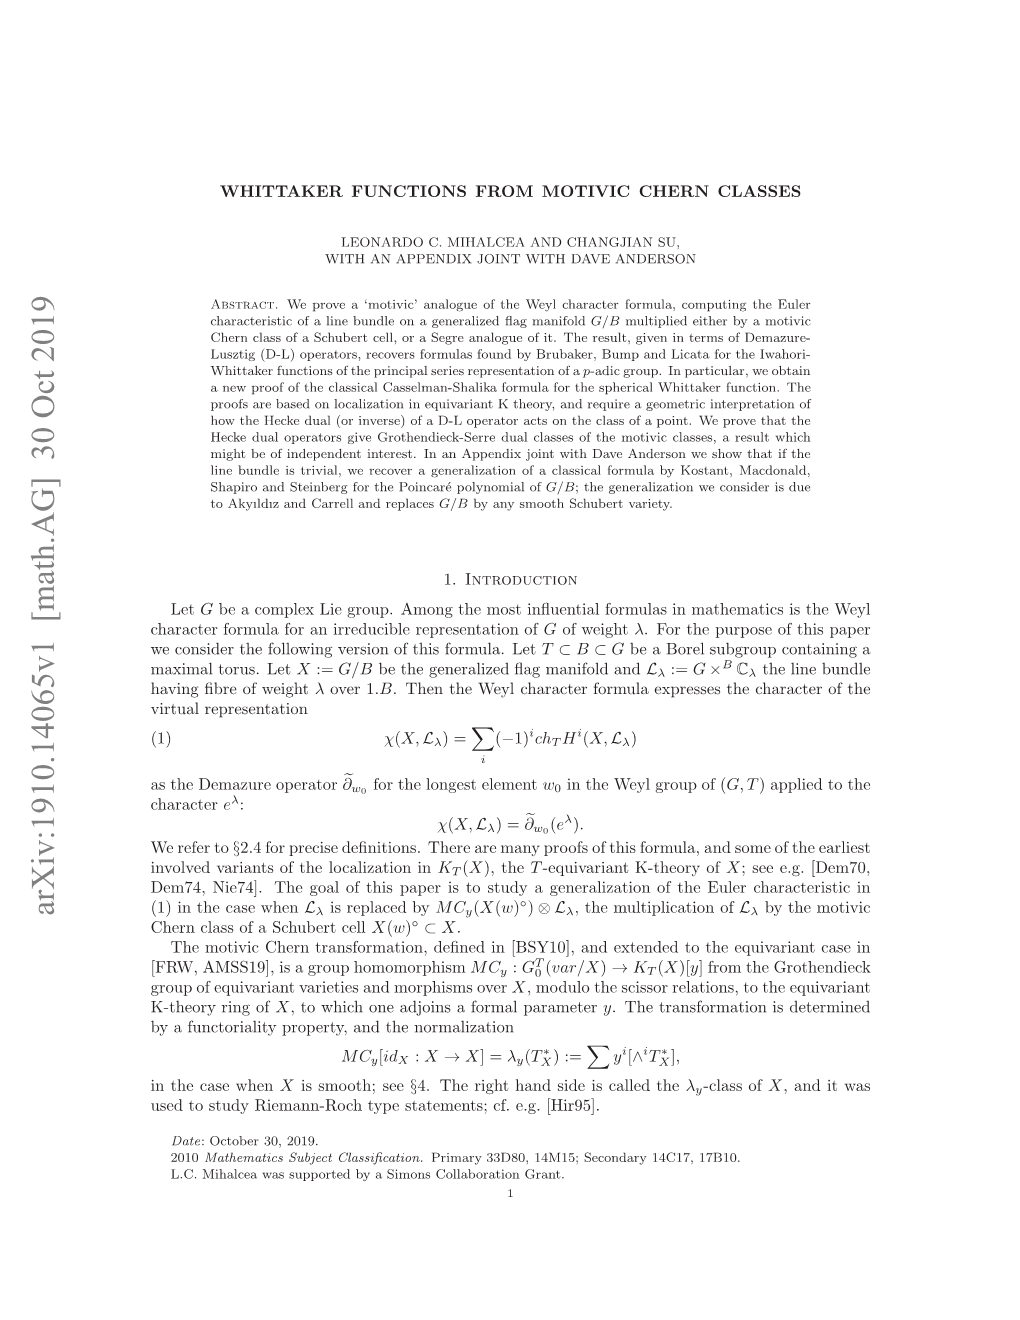 Whittaker Functions from Motivic Chern Classes